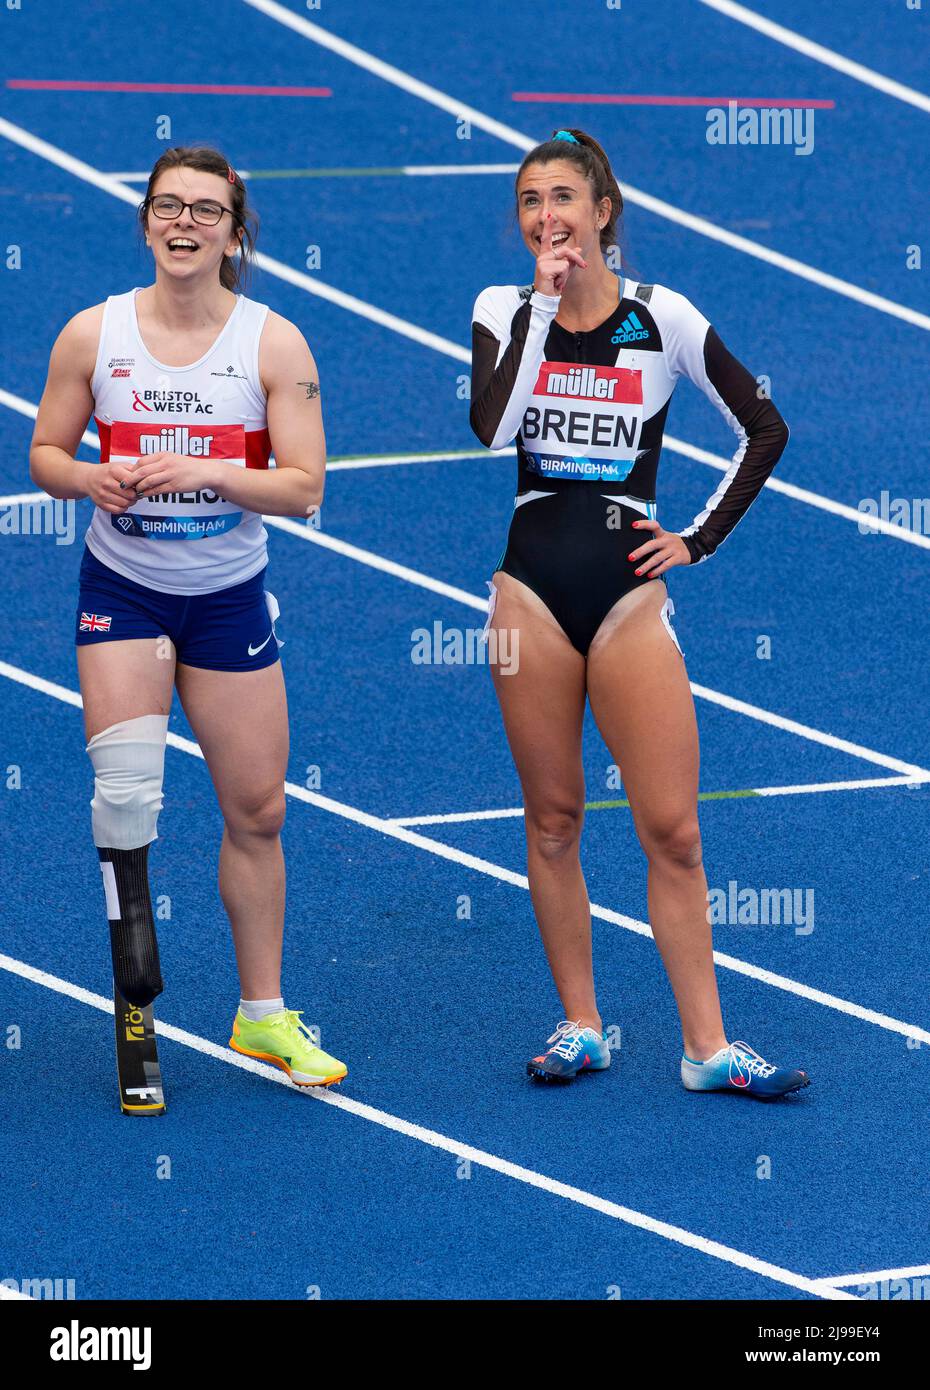 21-MAY-2022 Sophie Kamlish third with the time of 13.47 and Olivia Green second with a time of 13.14 in the Women 100m Ambulant Event at the Muller Birmingham Diamond League Alexander Stadium, Perry Barr, Birmingham Credit: PATRICK ANTHONISZ/Alamy Live News Stock Photo